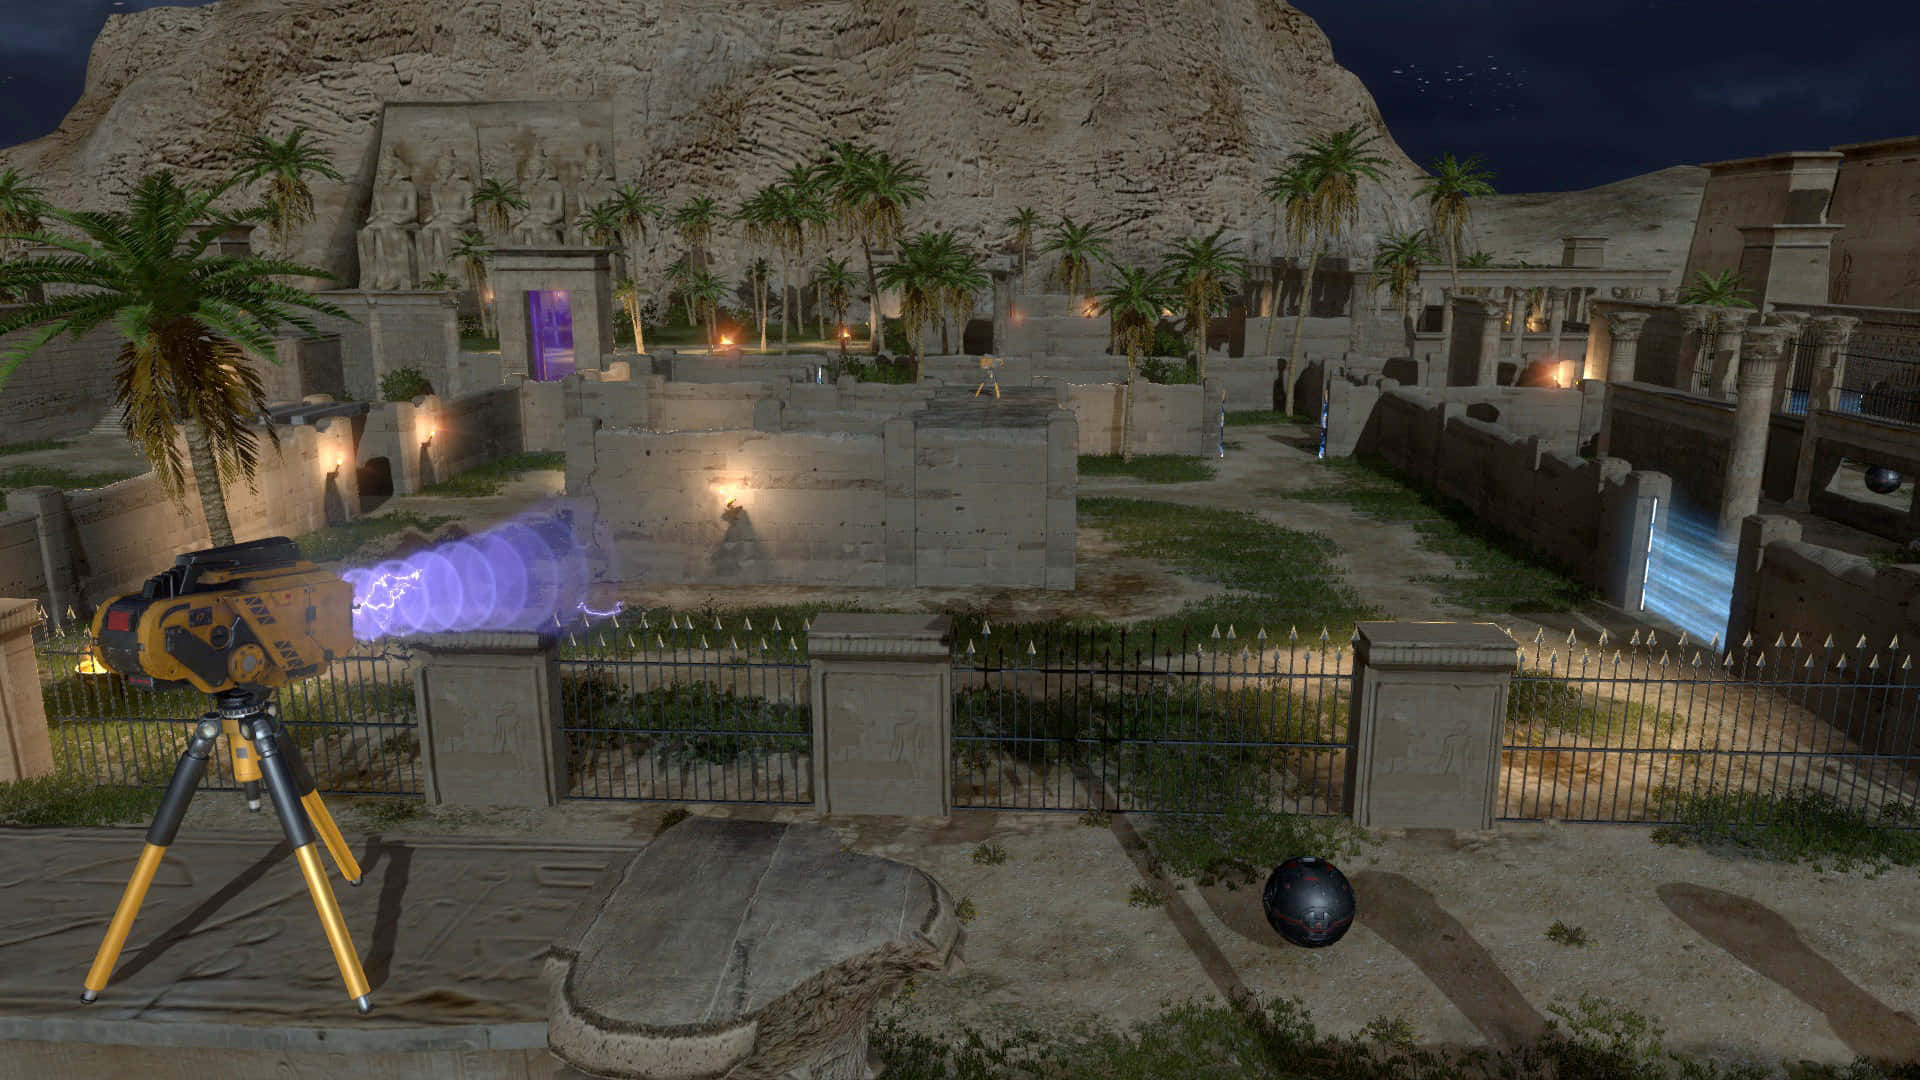 The Jammer In The Talos Principle Background